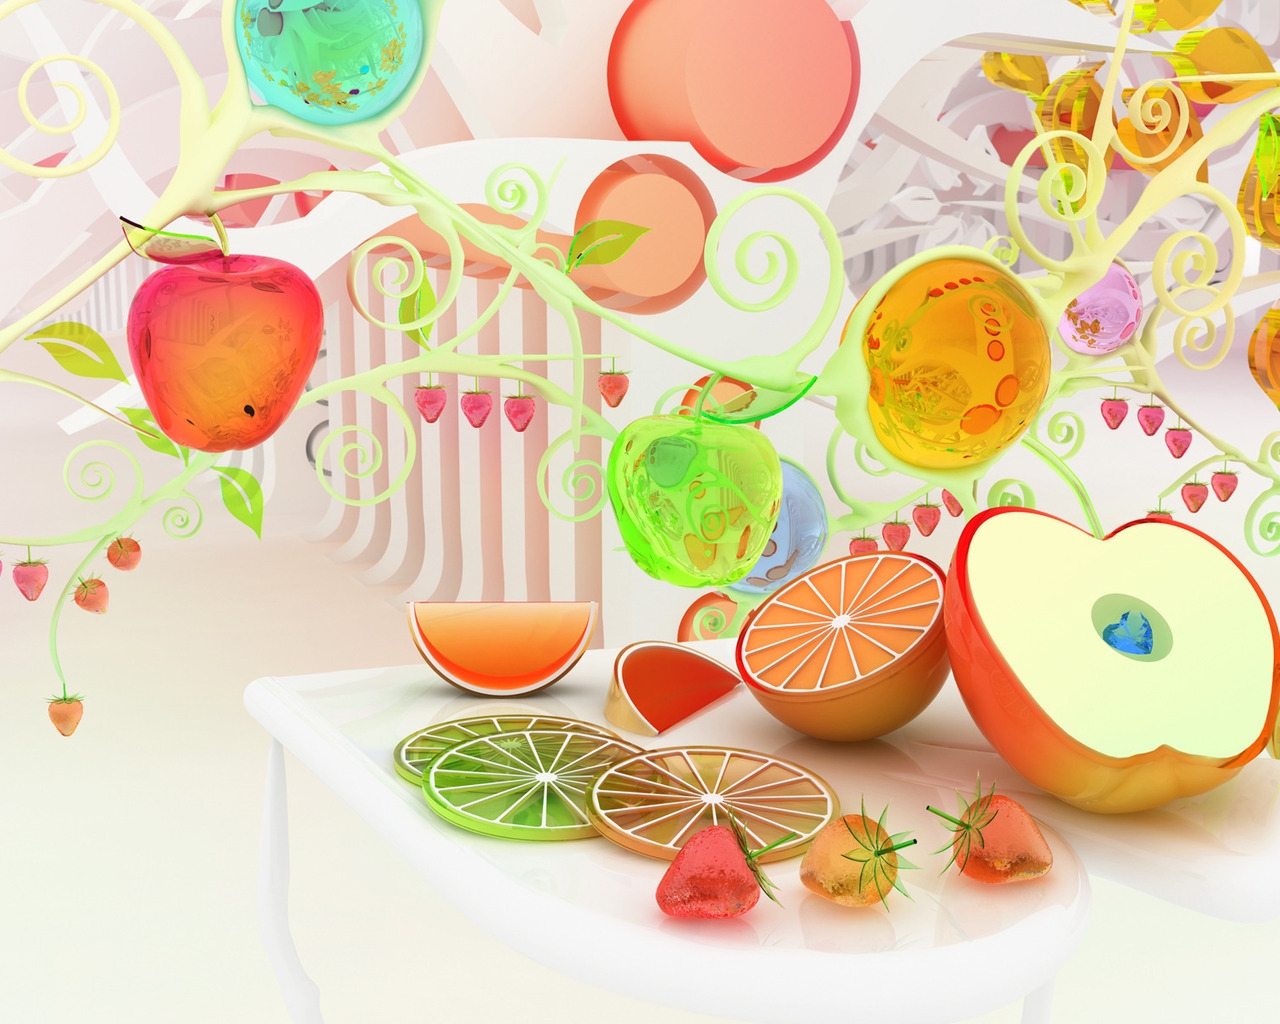 Fruits for 1280 x 1024 resolution